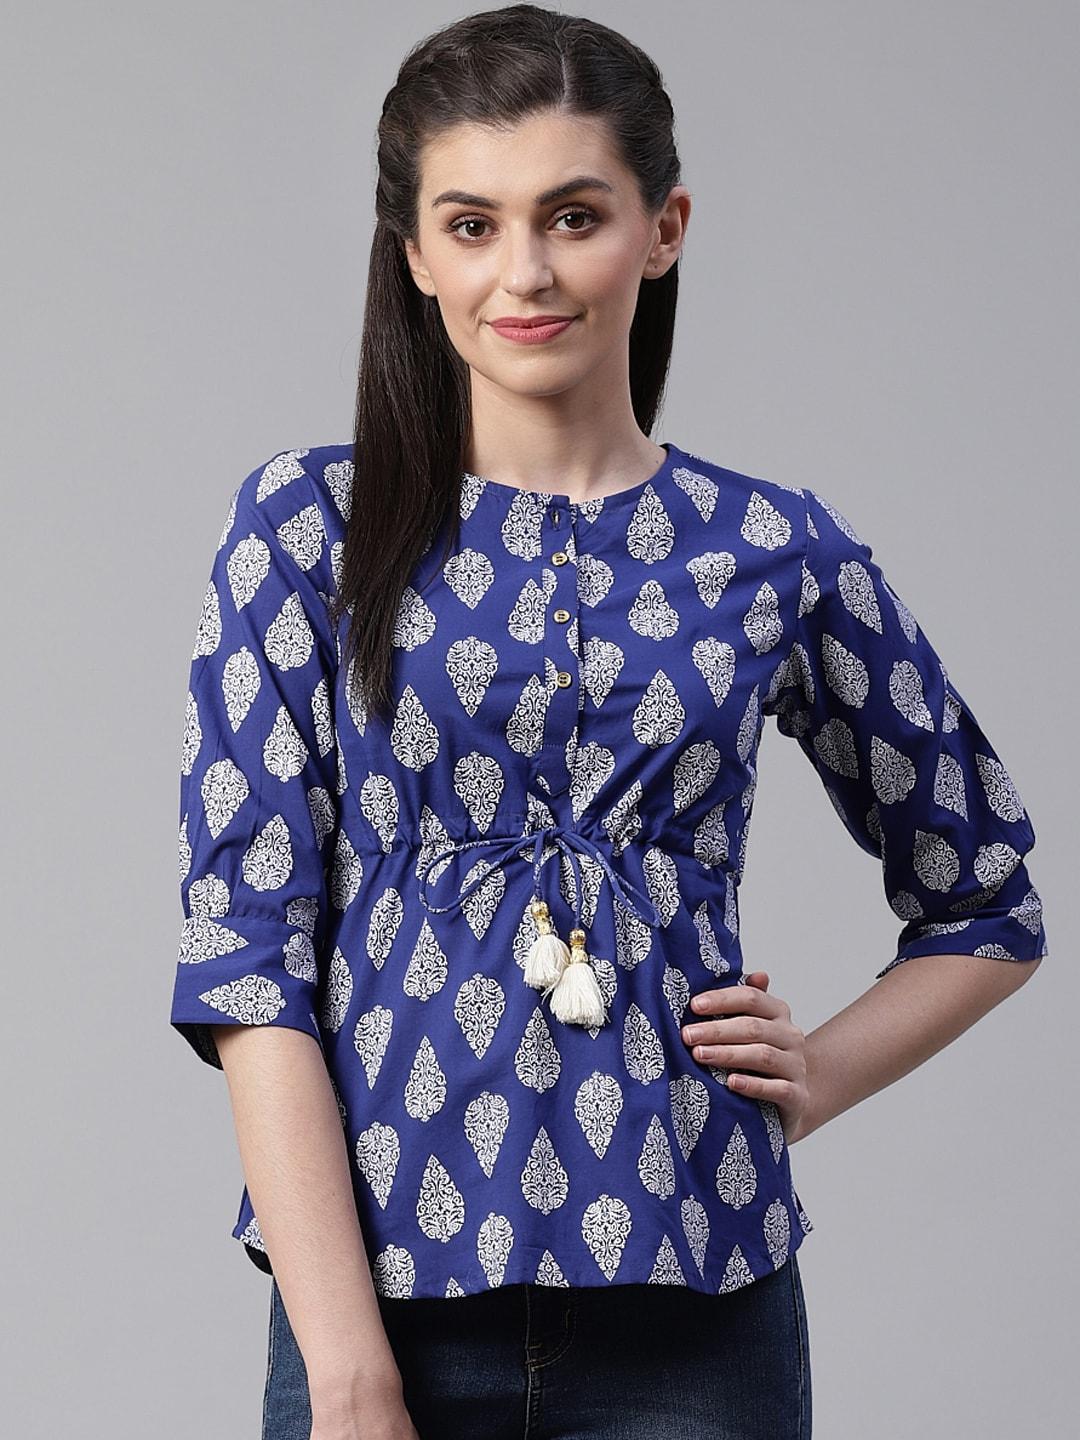 yash-gallery-women-navy-blue-&-white-printed-ethnic-cinched-waist-top